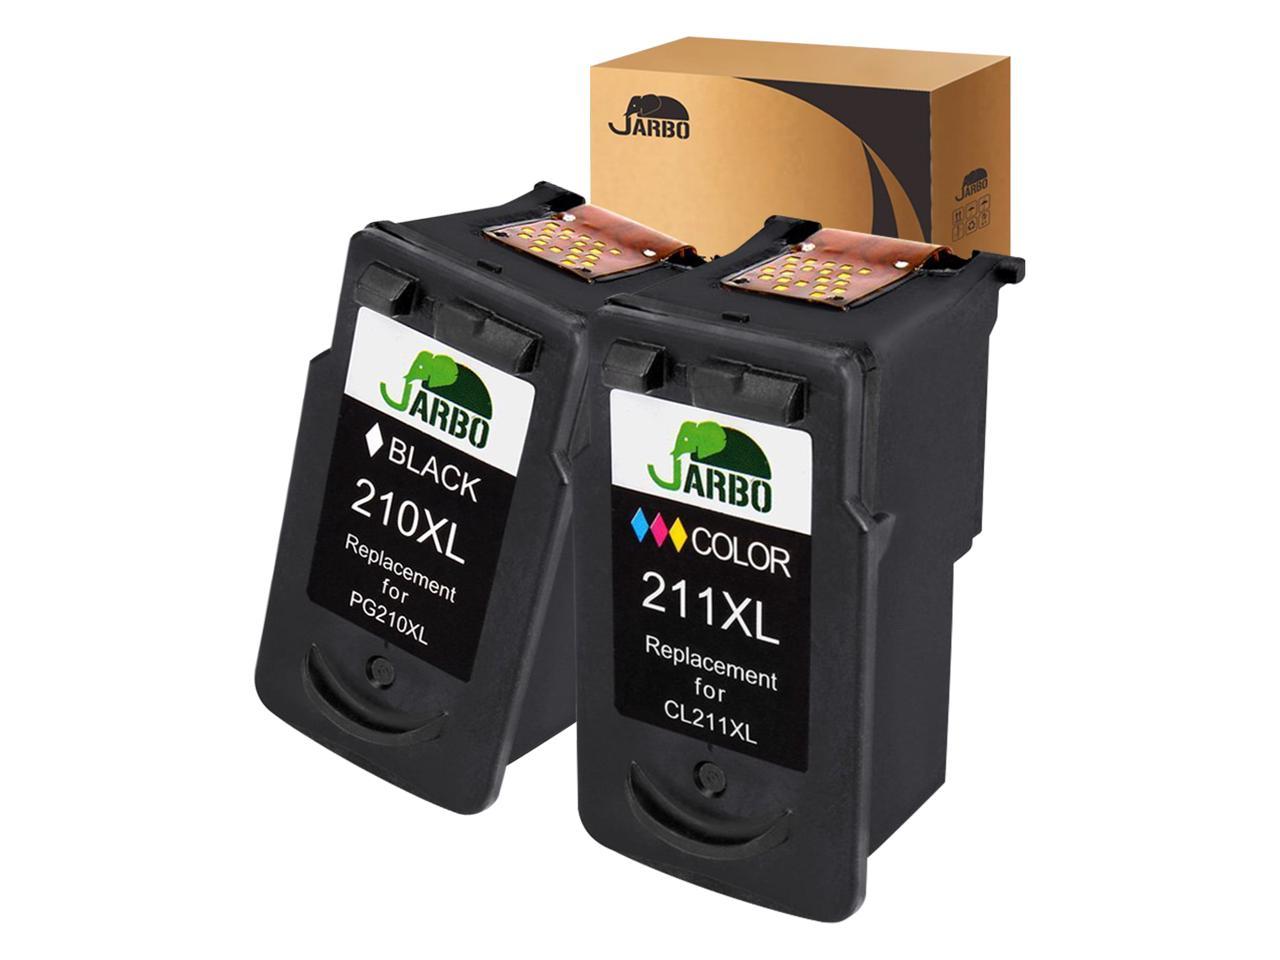 JARBO Canon PG-210XL CL-211XL Ink Cartridges, High yield